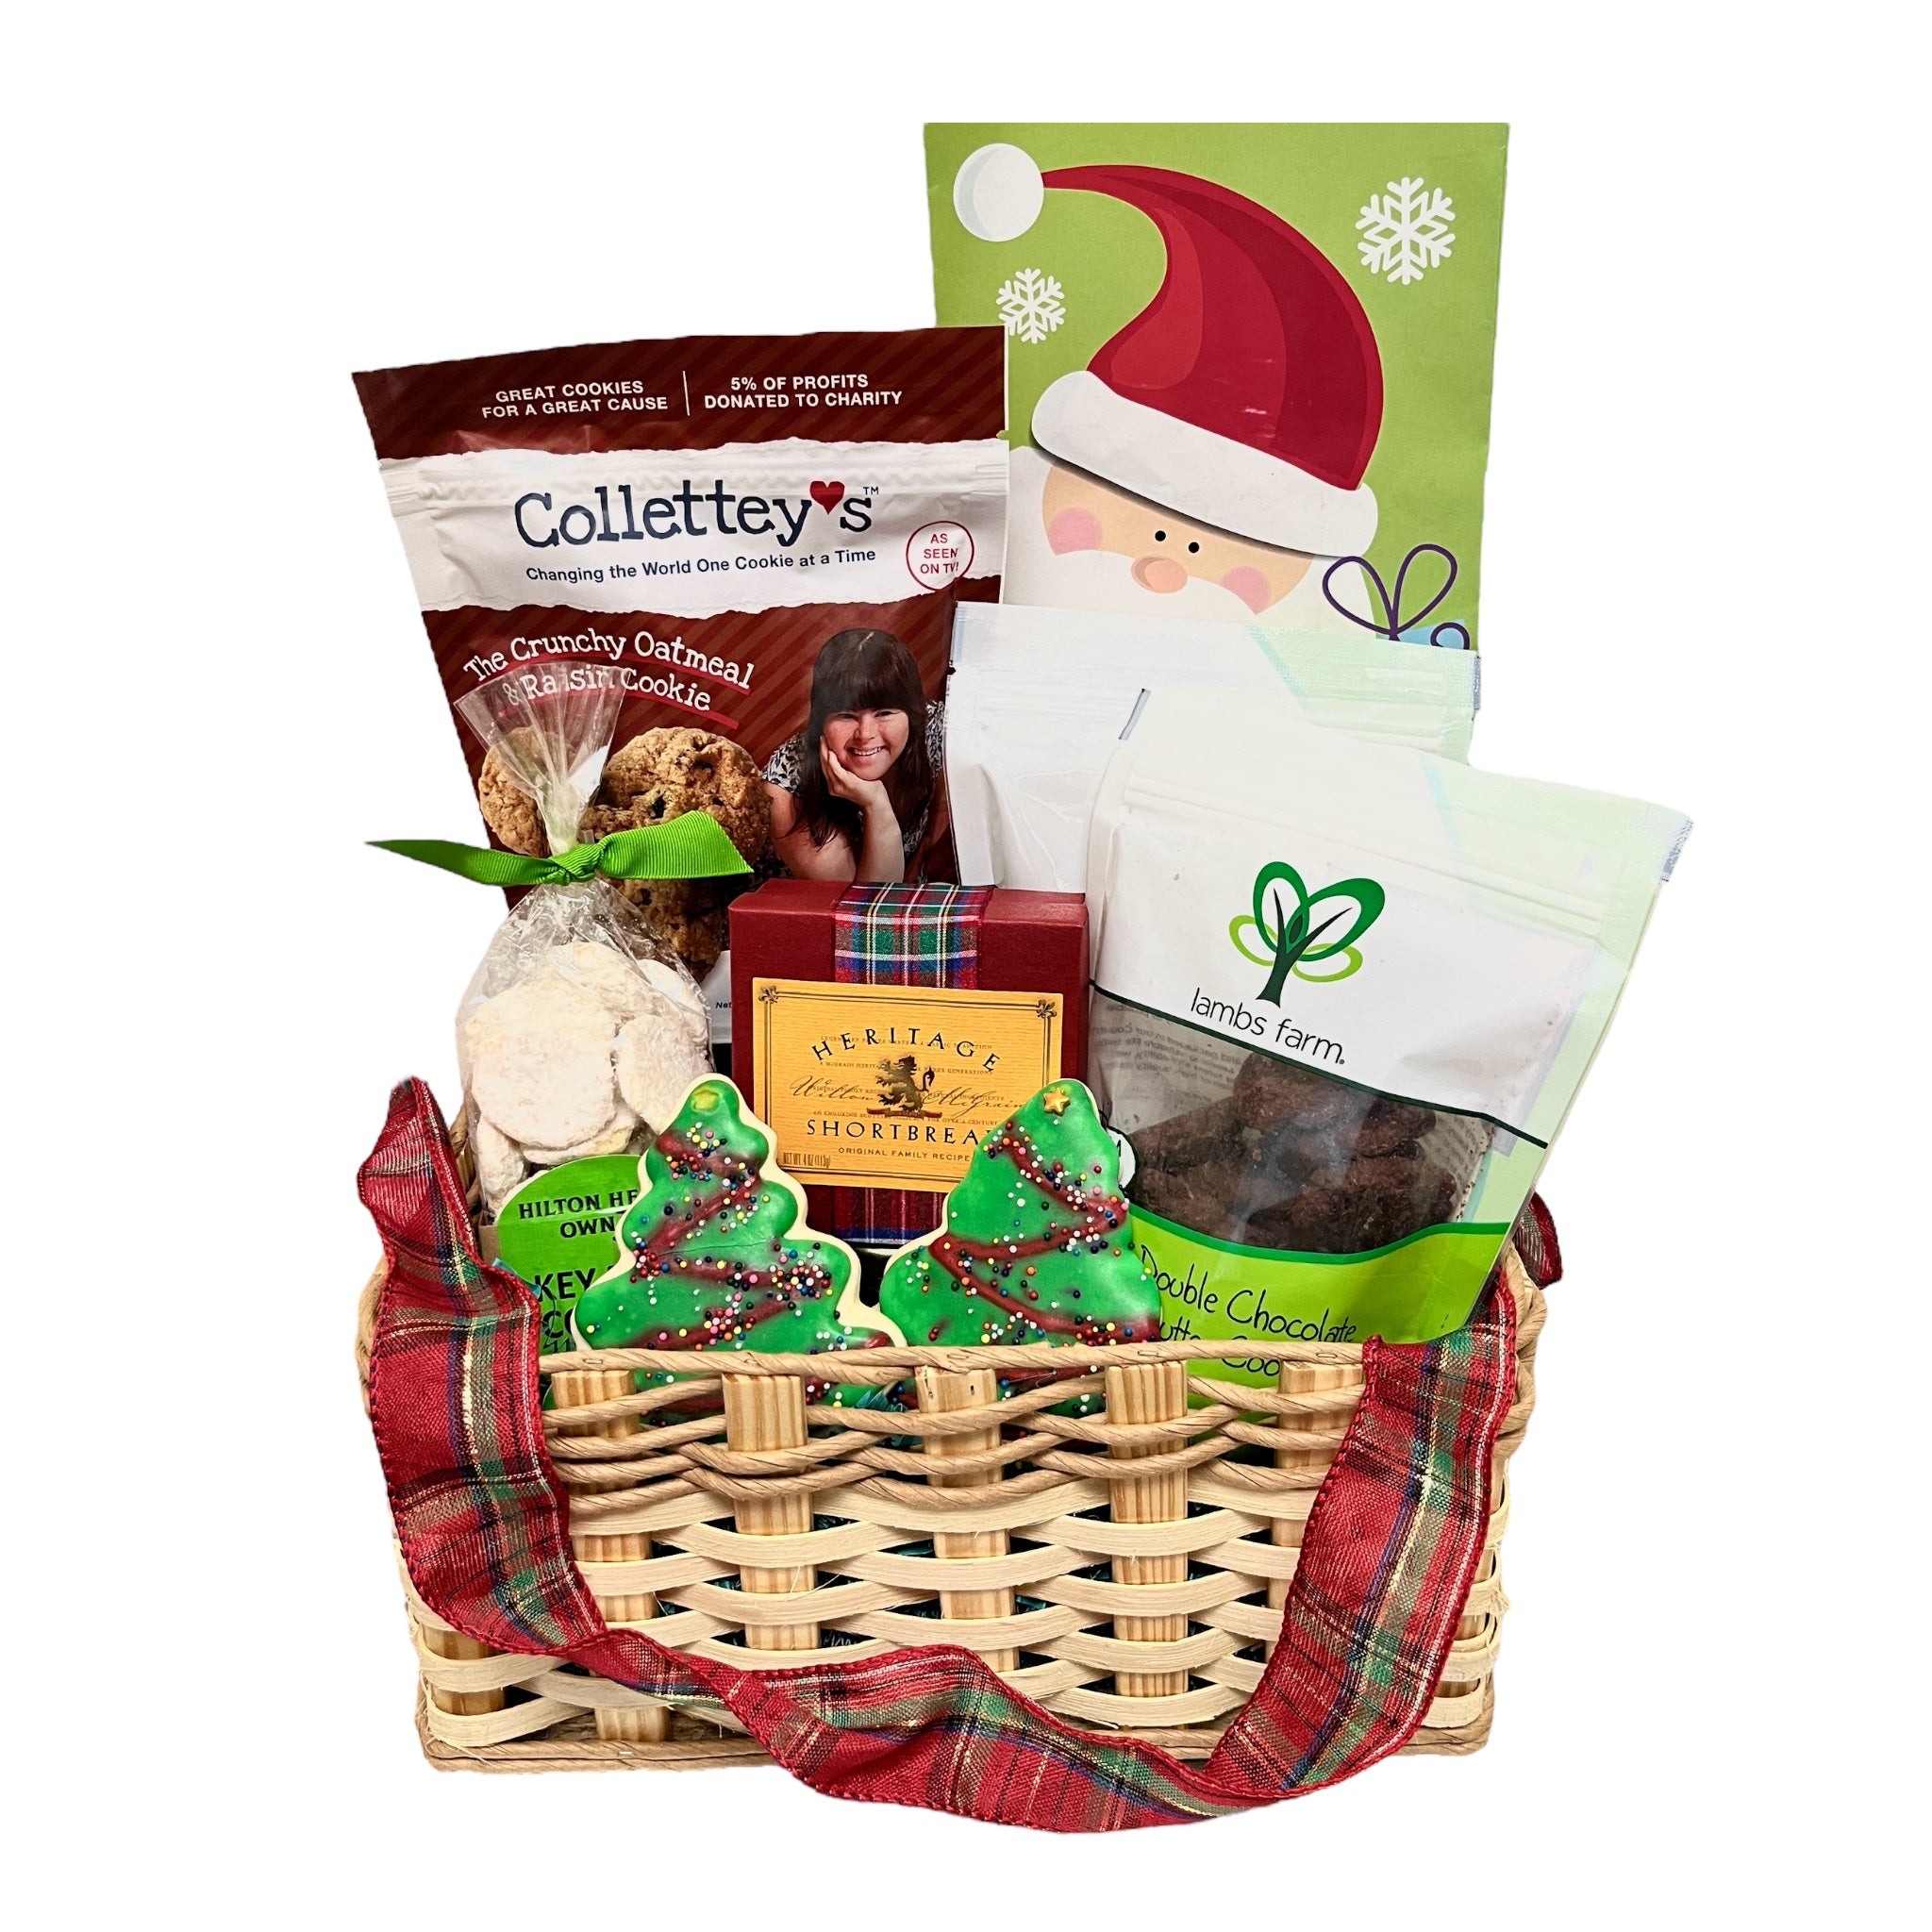 30 CHRISTMAS GIFT BASKETS for HER 2020